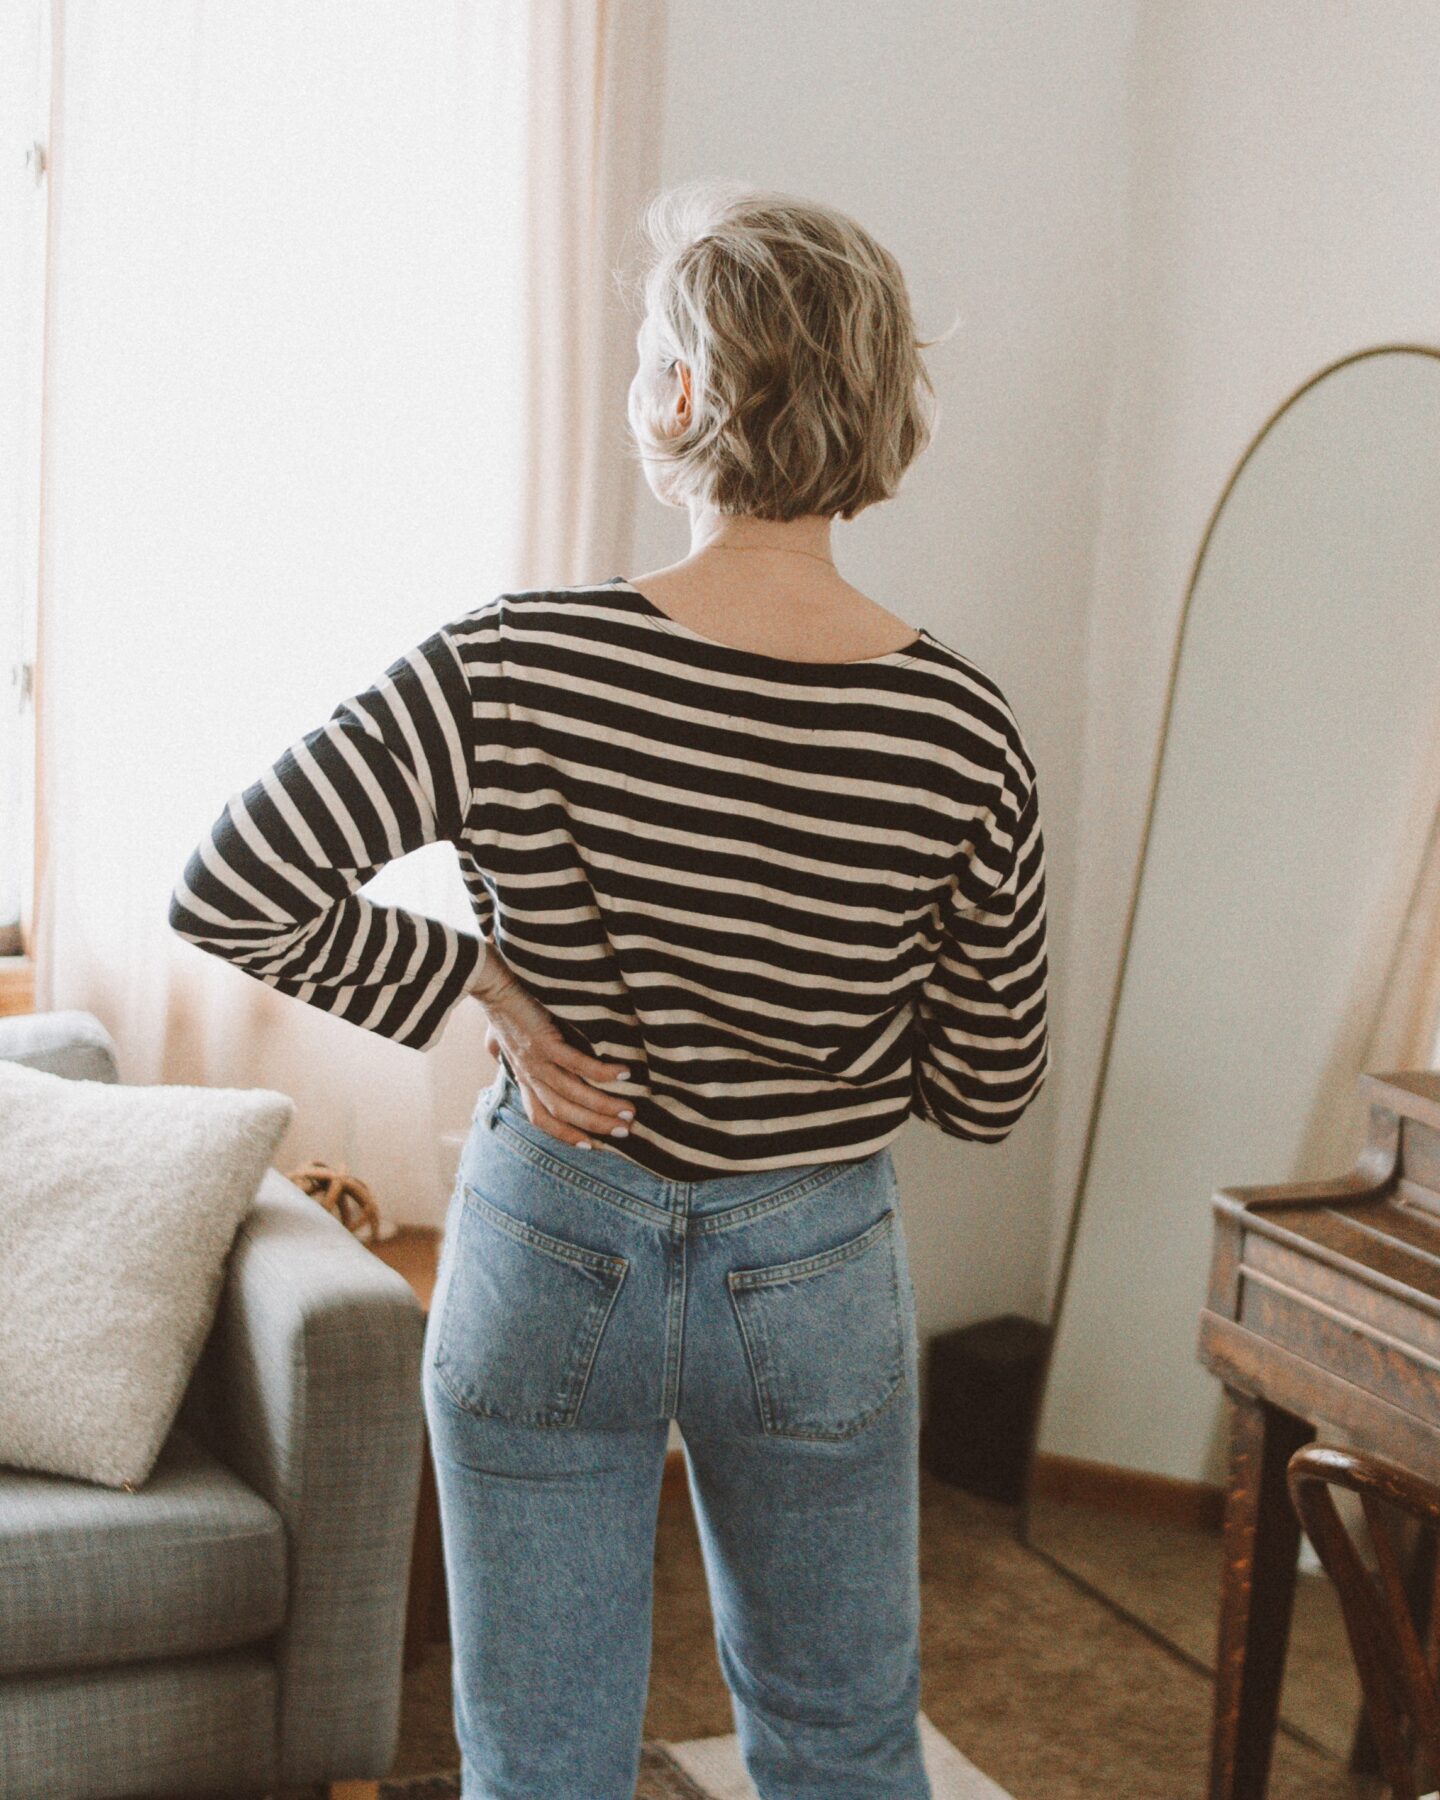 Karin Emily stands in front of her living room couch and standing mirror in her Agolde Lana jeans and Everlane breton stripe tee